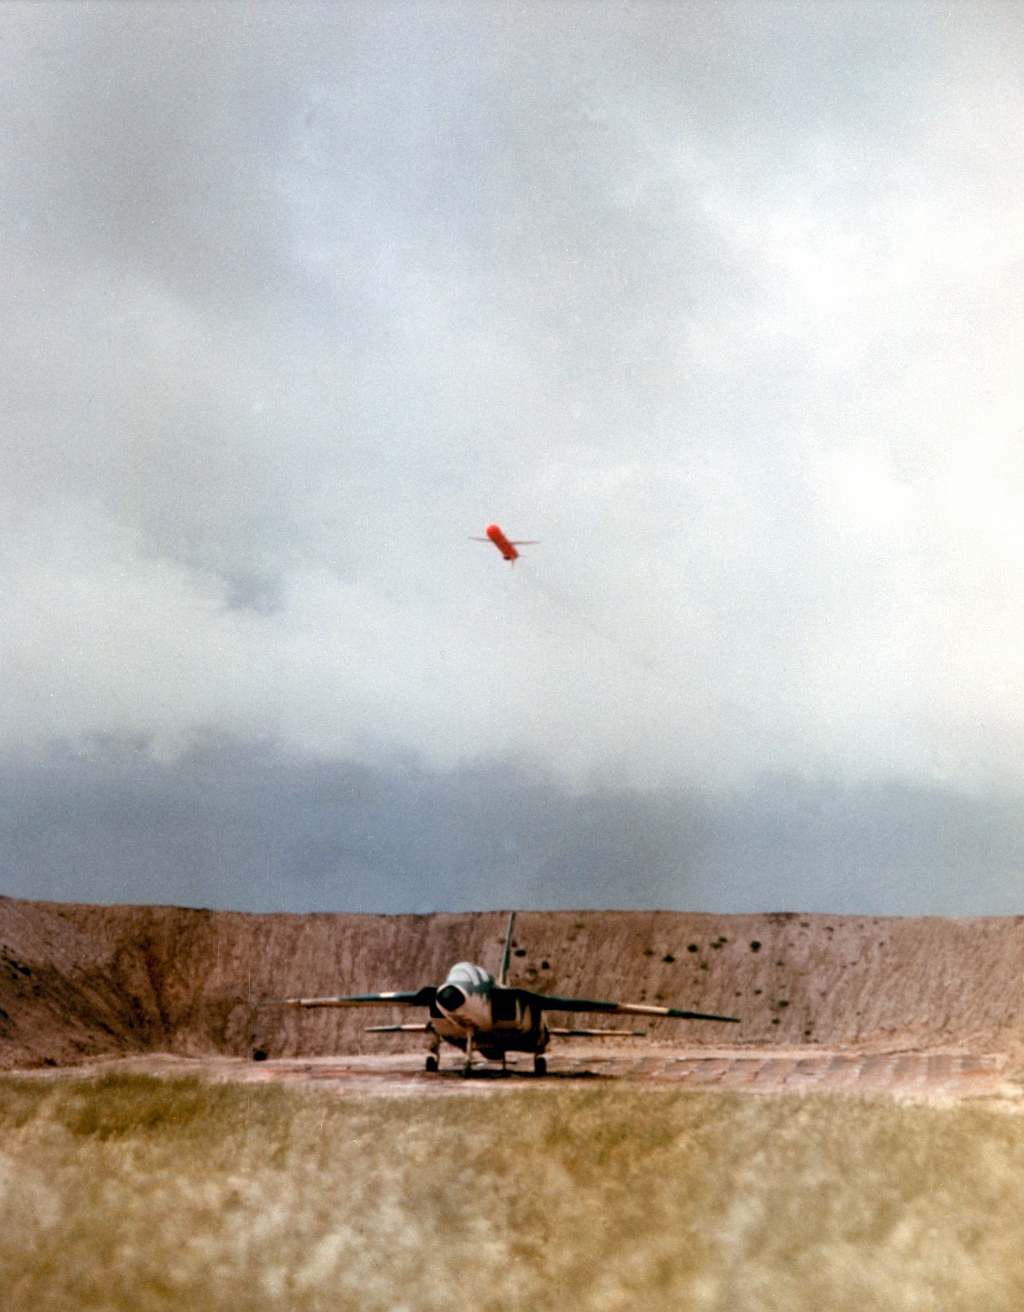 6a. Launched from a submerged United States Navy submarine off the coast of California and traveling more than 400 miles, the BGM-109 Tomahawk cruise missile approaches the target,a revetted aircraft, April 1, 1986, San Clemente Island, State of California, USA. Photo Credit: Defense Visual Information Center (DVIC, http://www.DoDMedia.osd.mil, DN-SC-86-06113) and United States Navy (USN, http://www.navy.mil), United States Department of Defense (DoD, http://www.DefenseLink.mil or http://www.dod.gov), Government of the United States of America (USA).